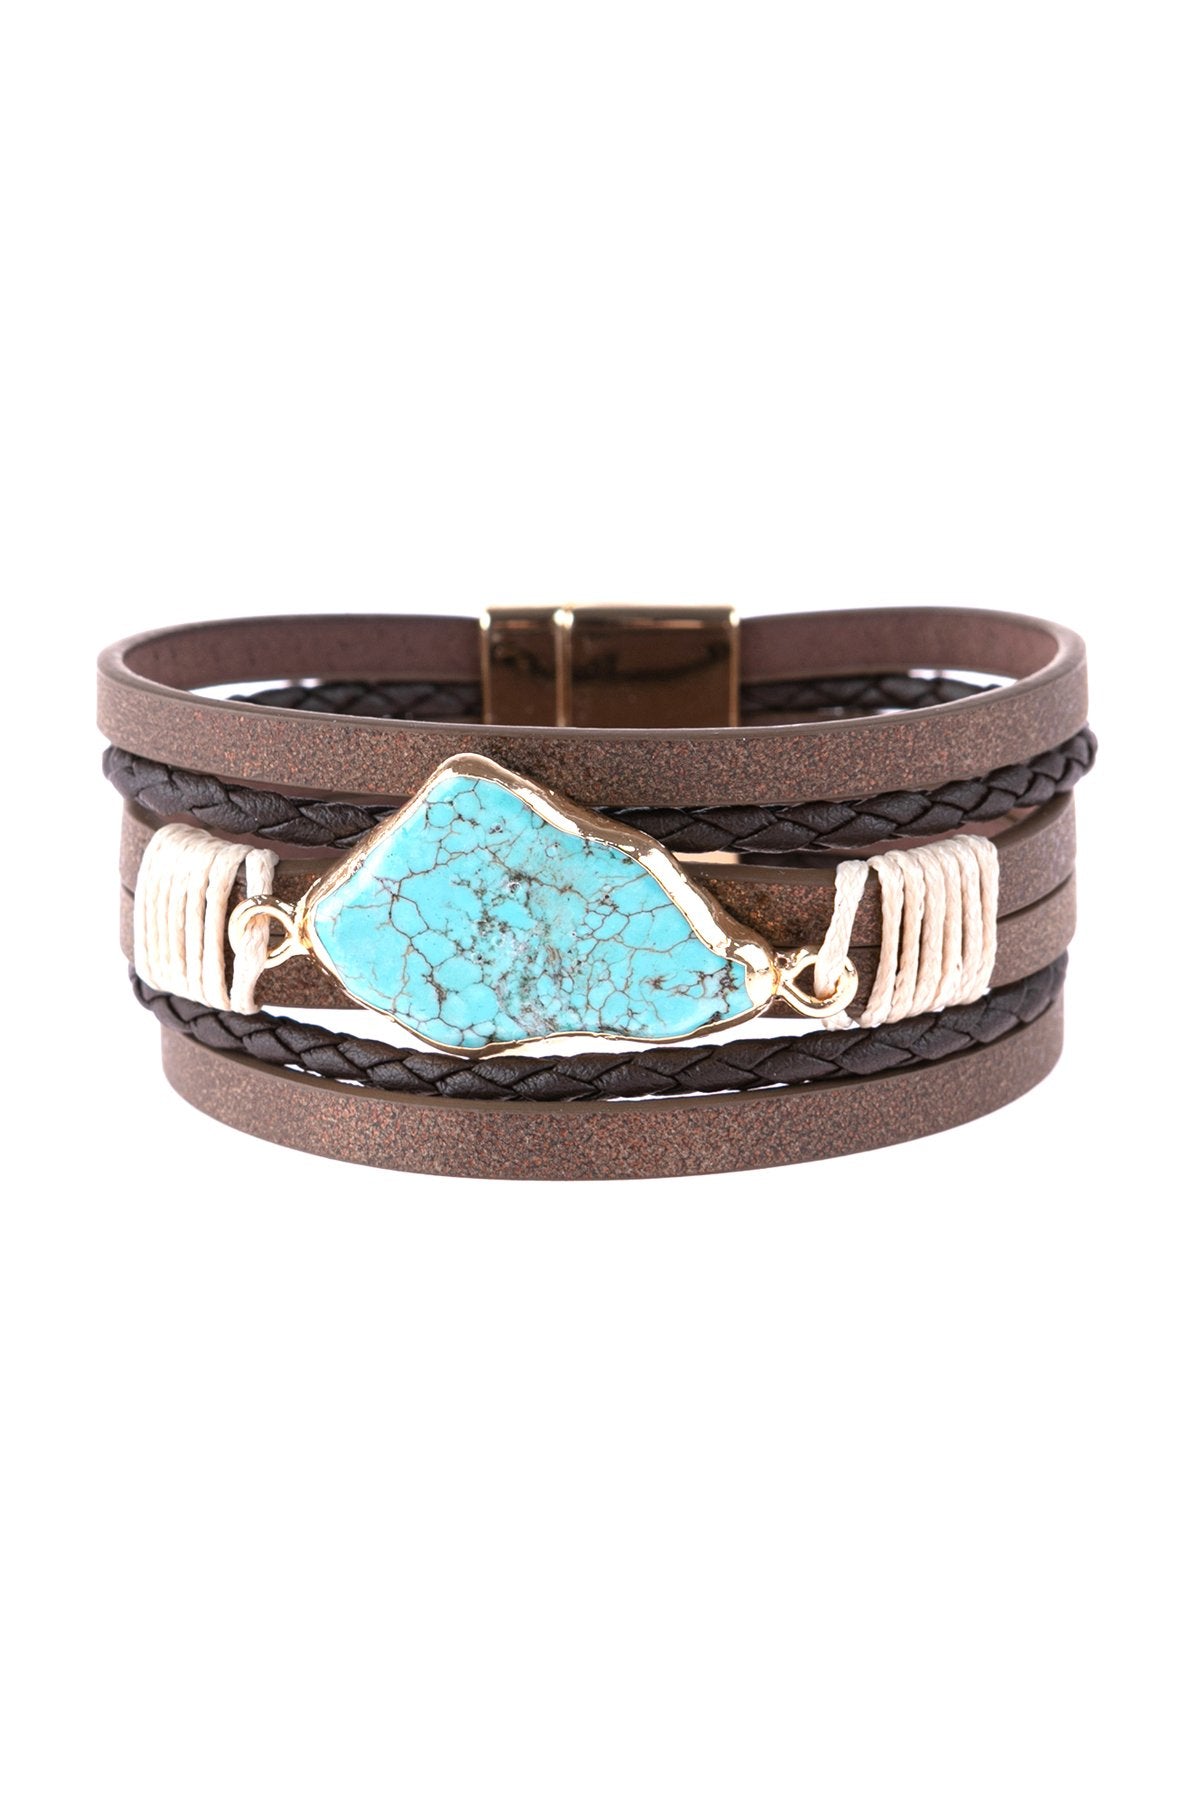 Hdb3125 - Multi Line Leather With Magnetic Lock Charm Bracelet